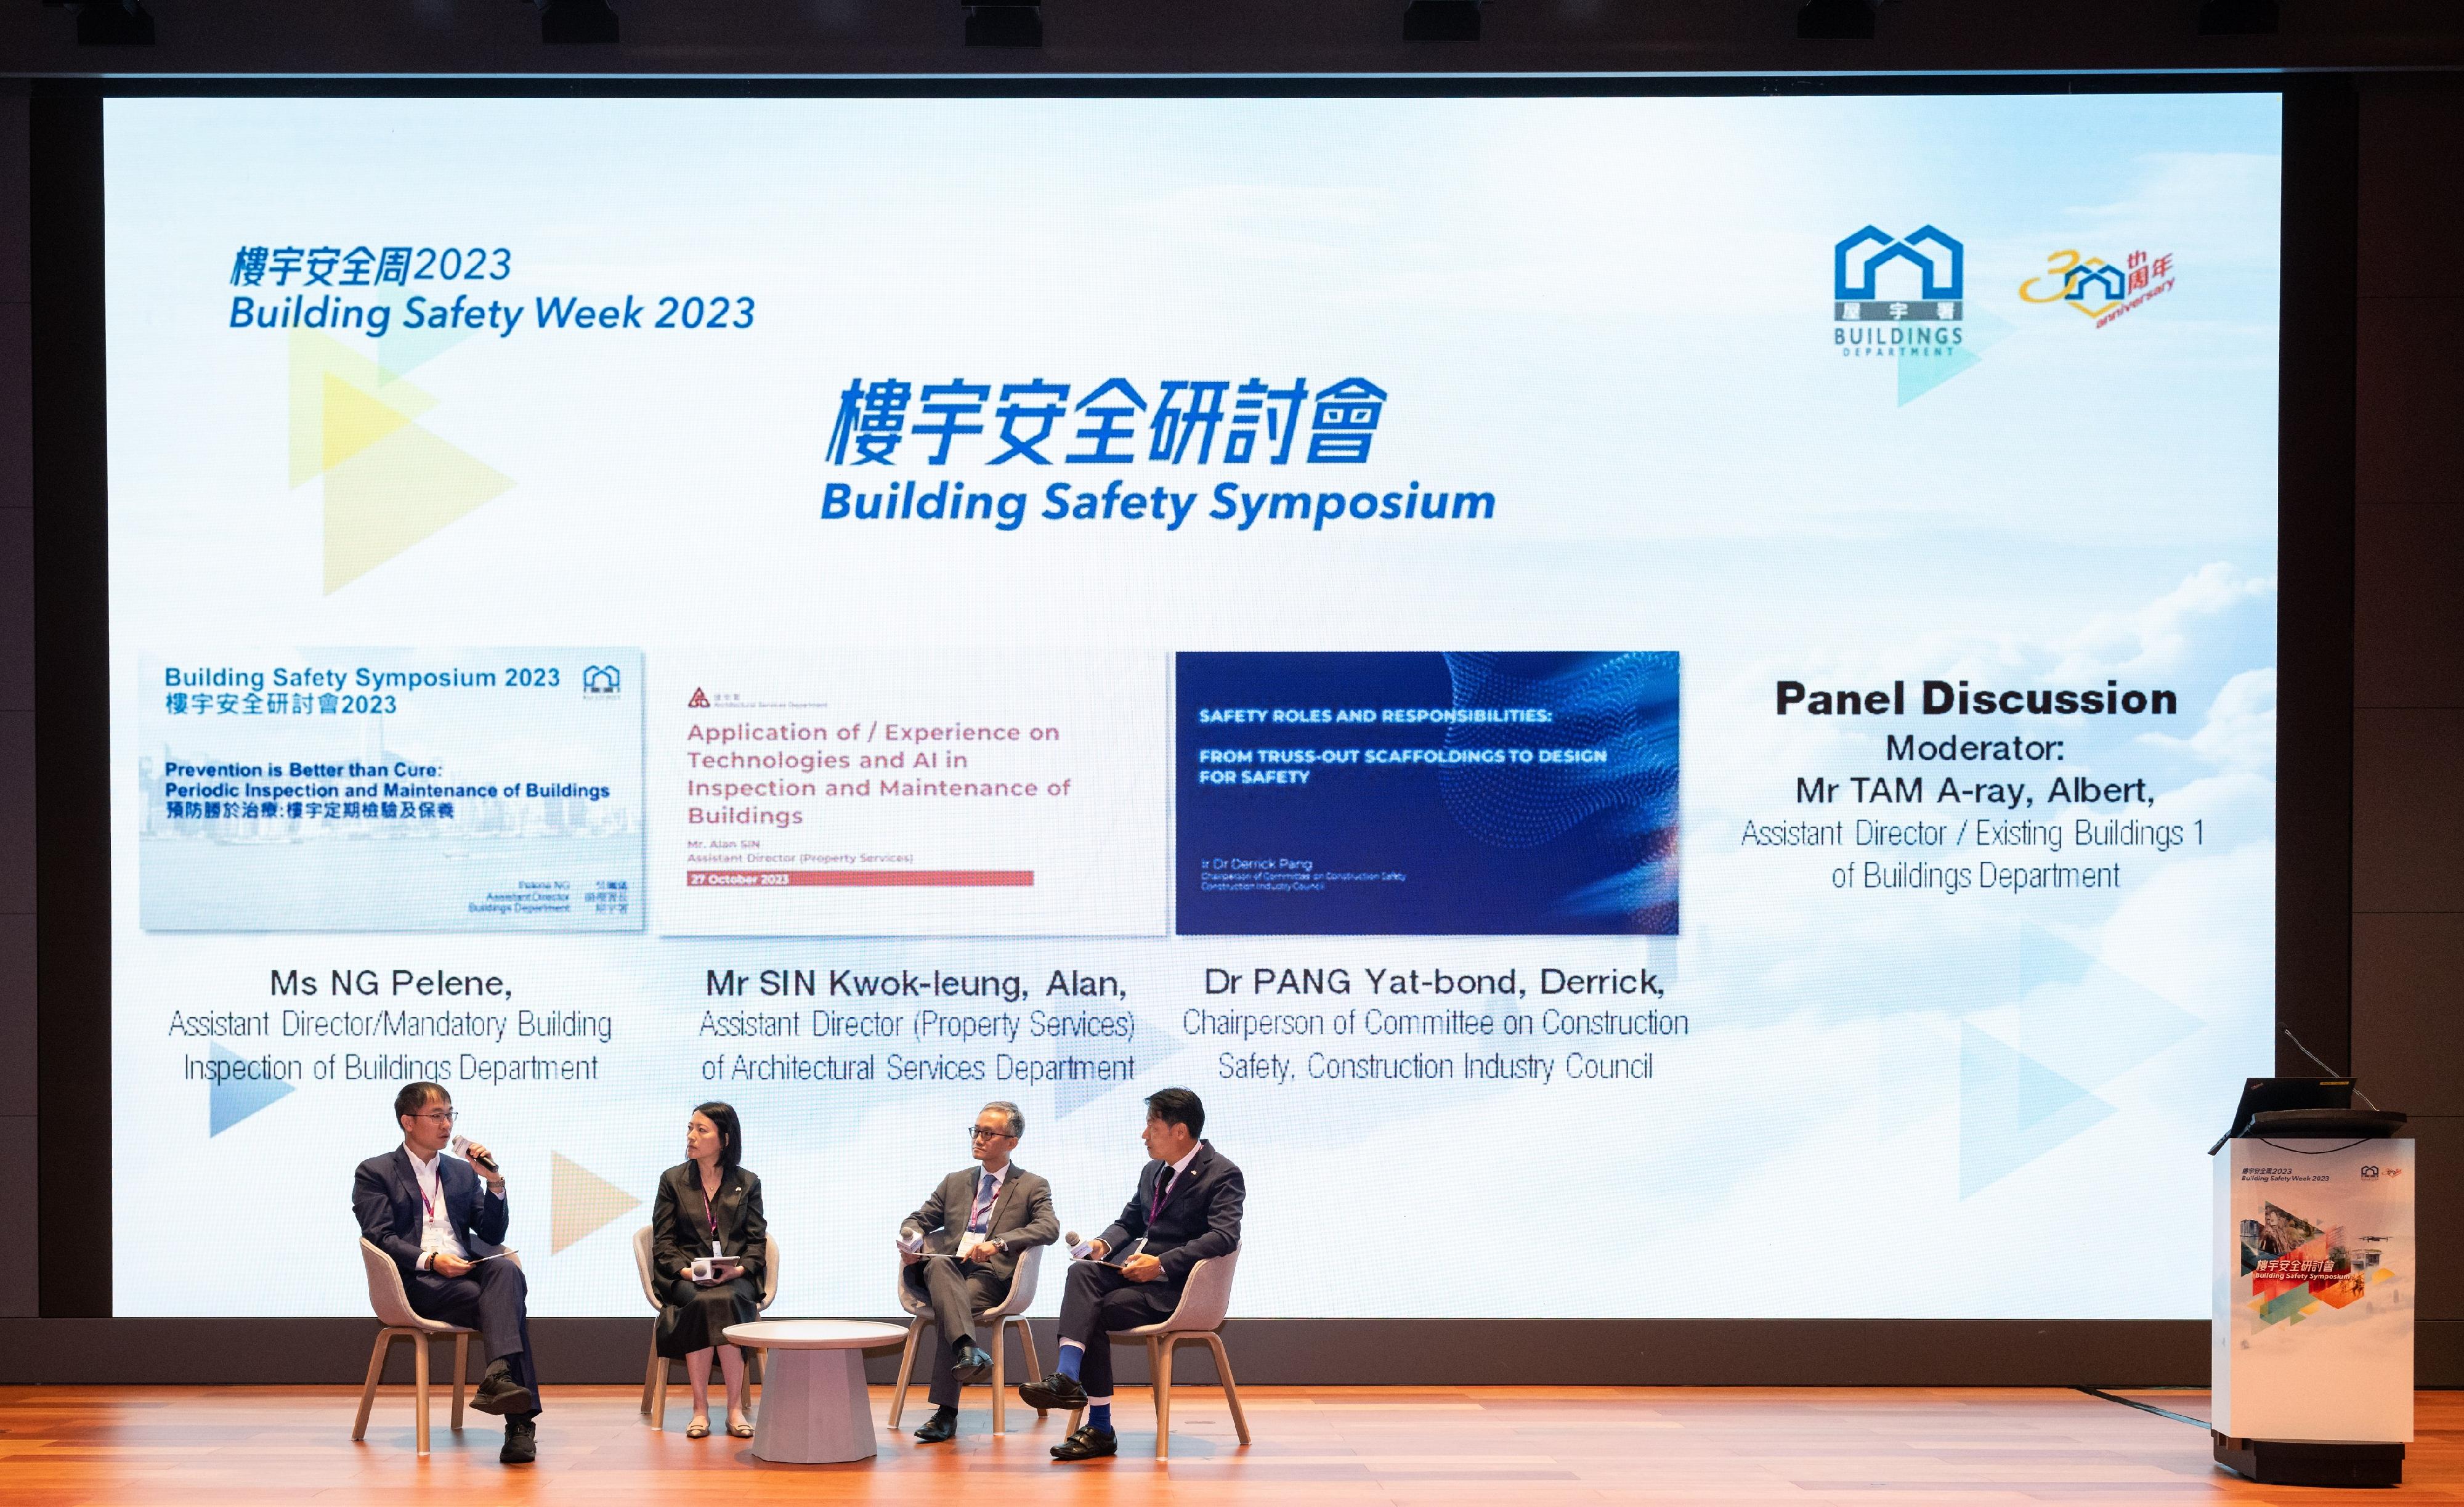 The Buildings Department held the closing event of Building Safety Week 2023, the Building Safety Symposium, at the Hong Kong Palace Museum today (October 27). Photo shows speakers participating in one of the panel discussions at the symposium.